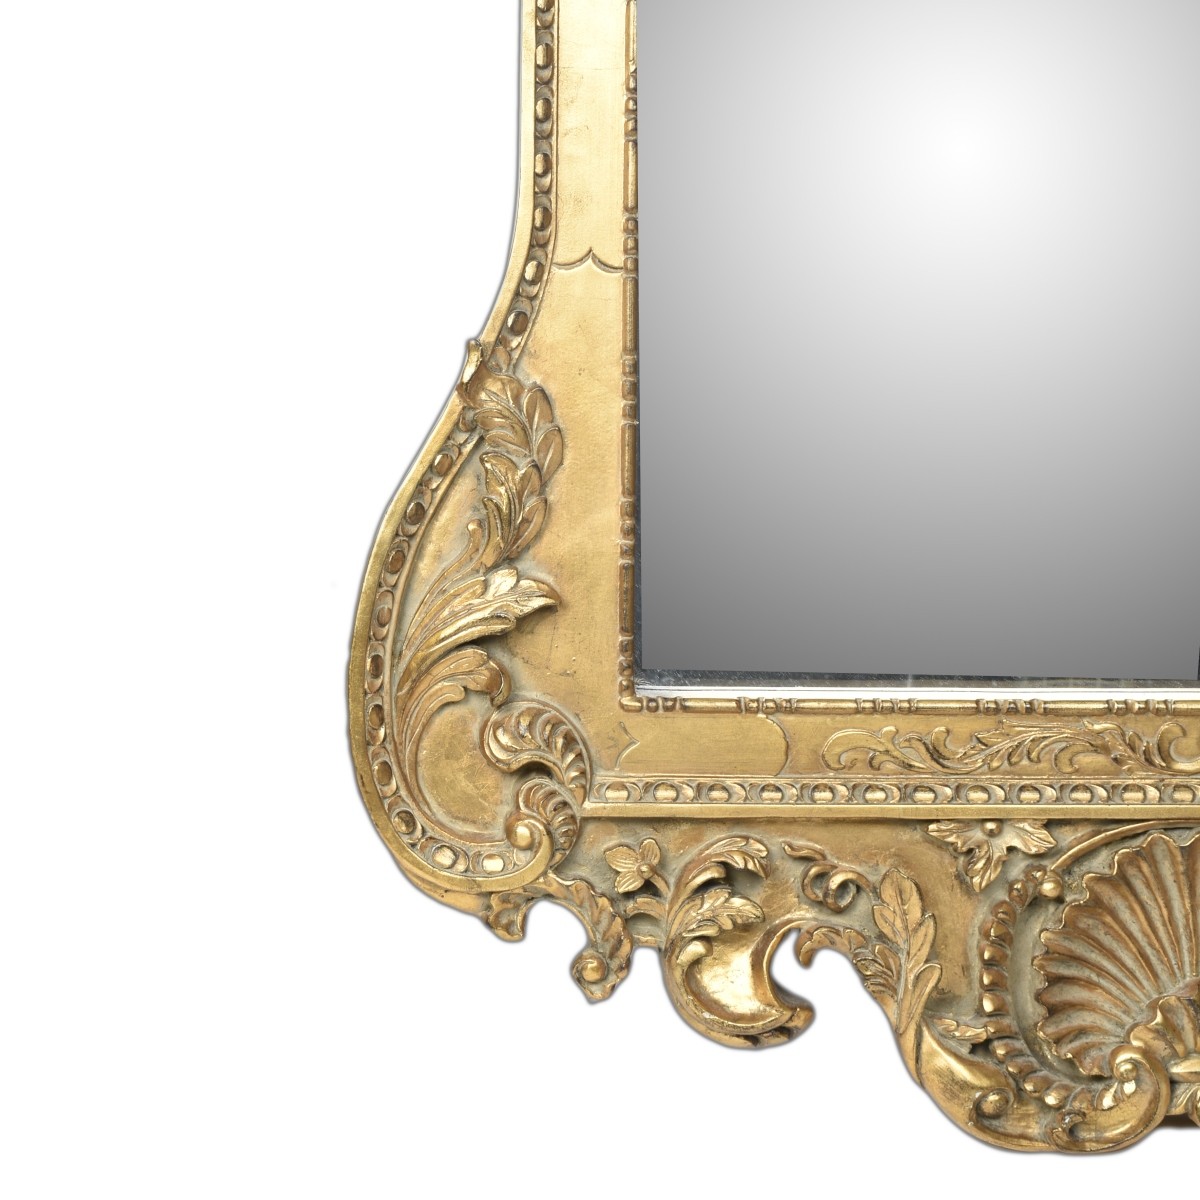 Pair of Neoclassical Style Gilt Mirrors